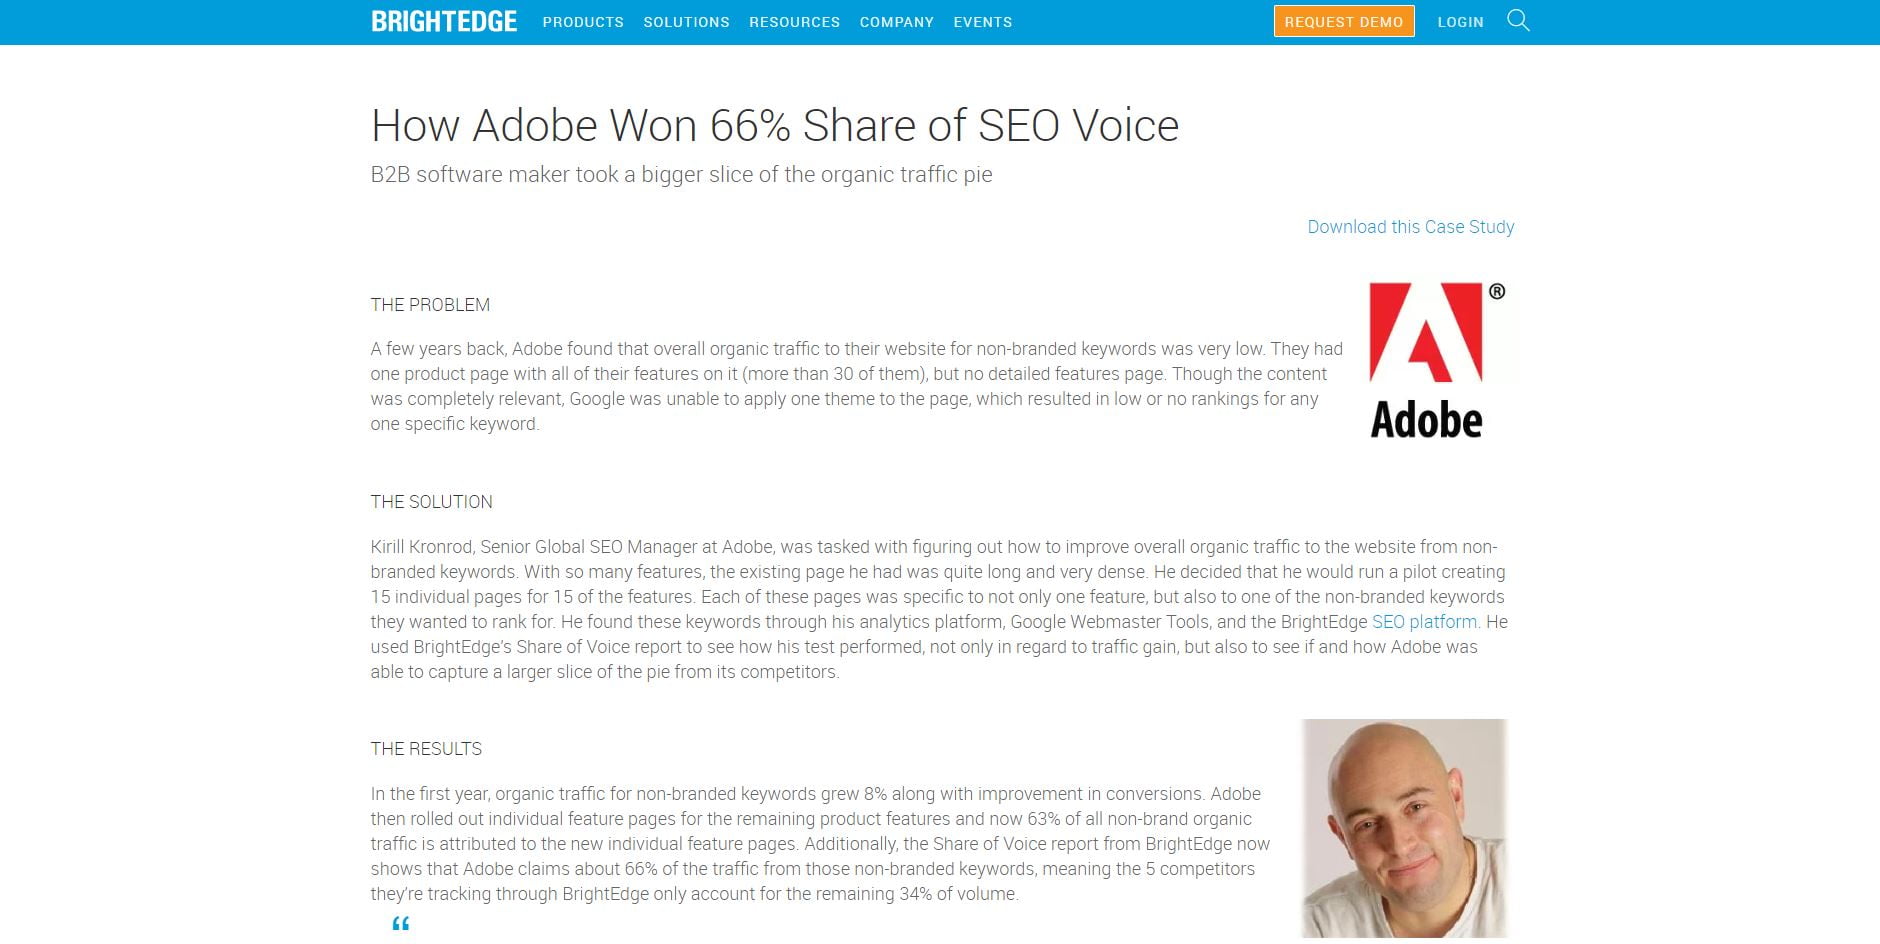 Brightedge and Adobe case study page